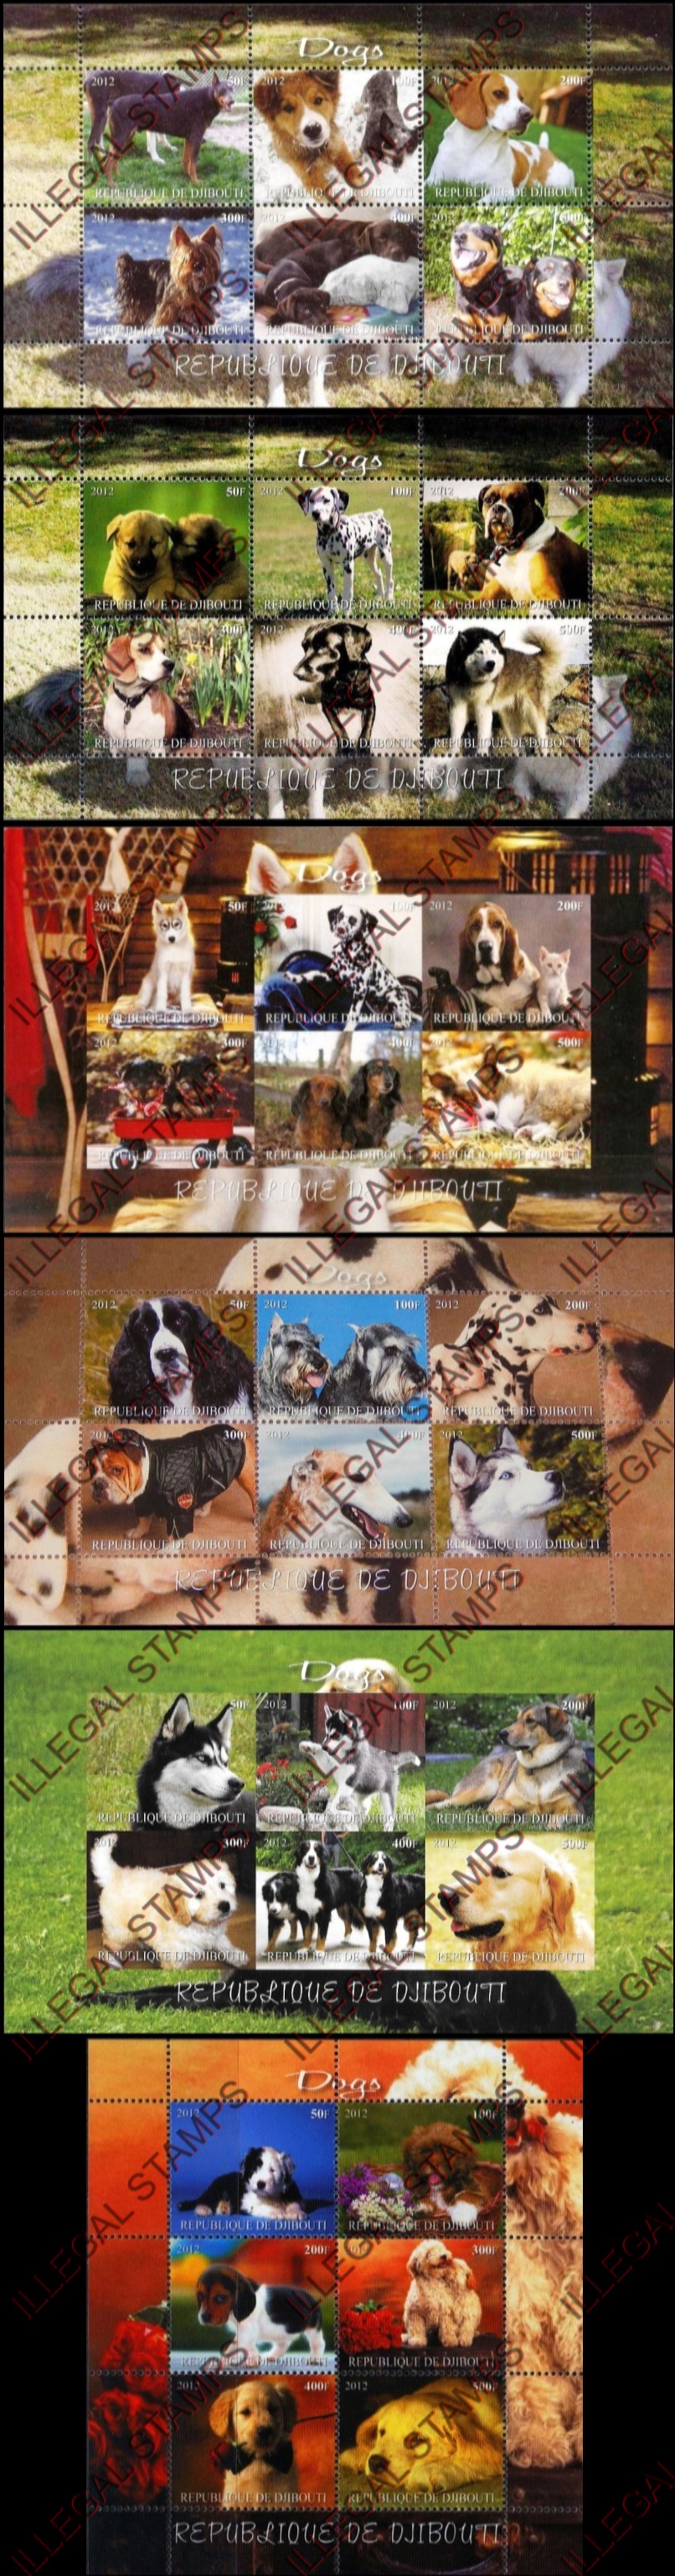 Djibouti 2012 Dogs Illegal Stamp Sheetlets of 6